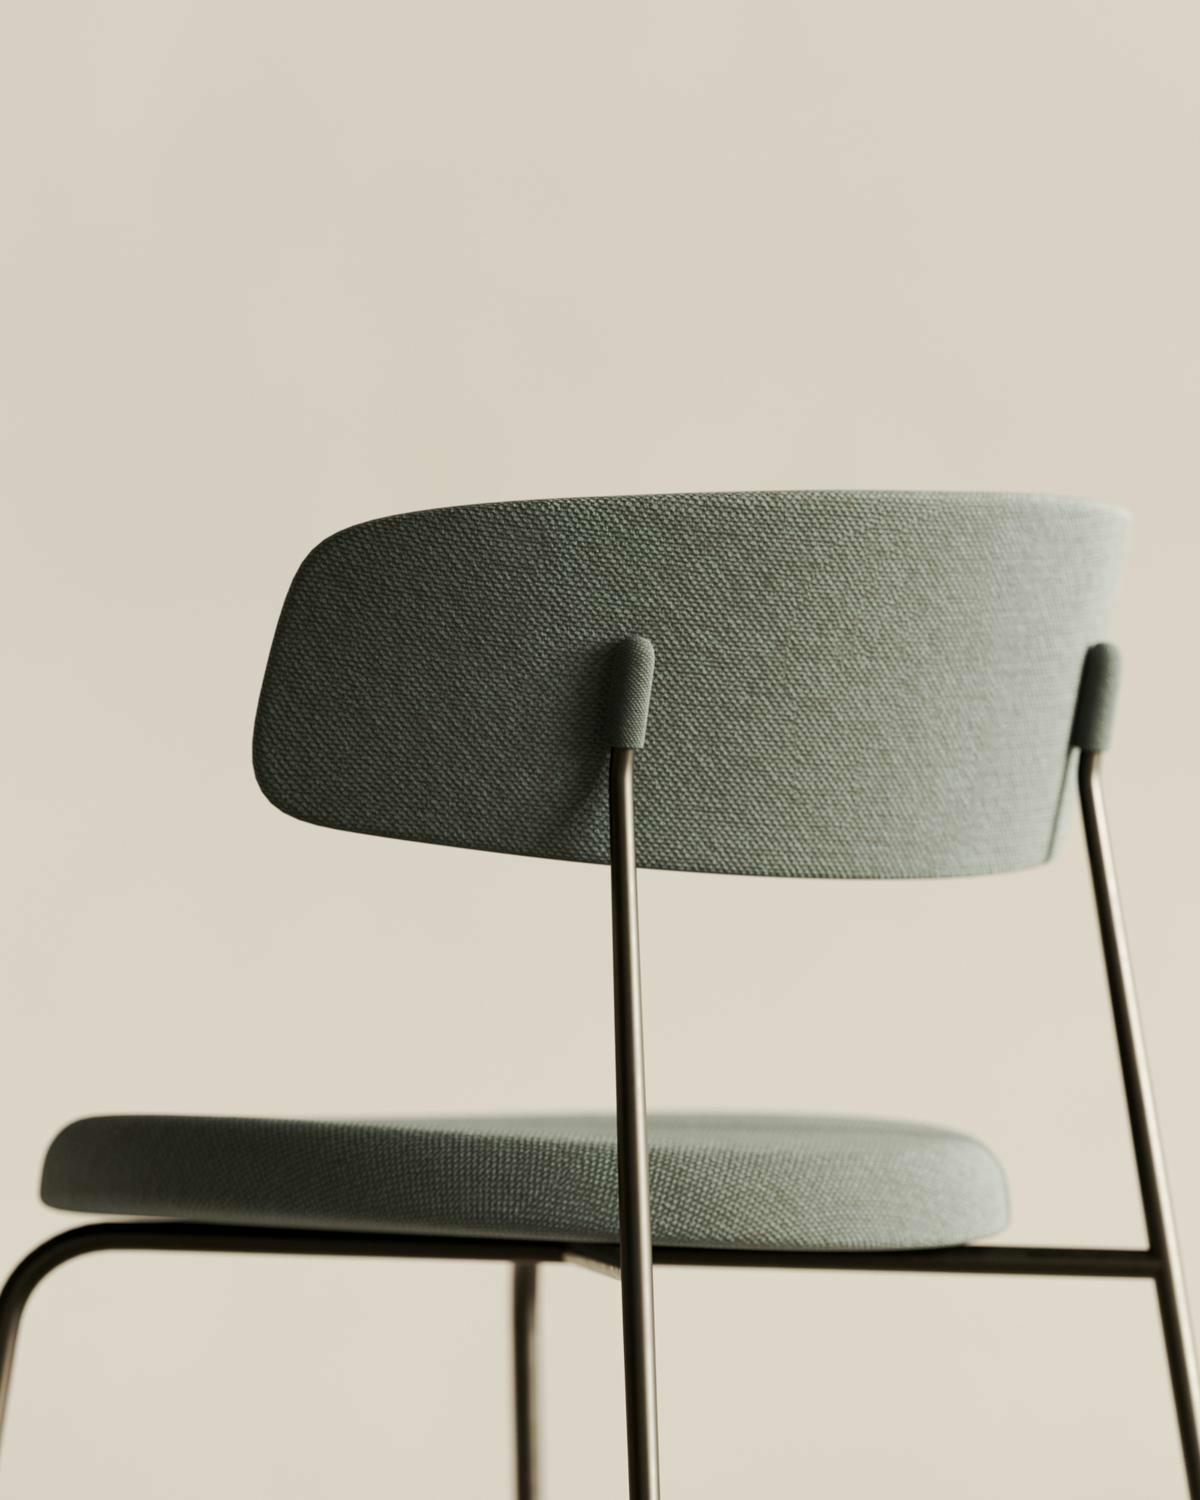 COVER METAL CHAIR